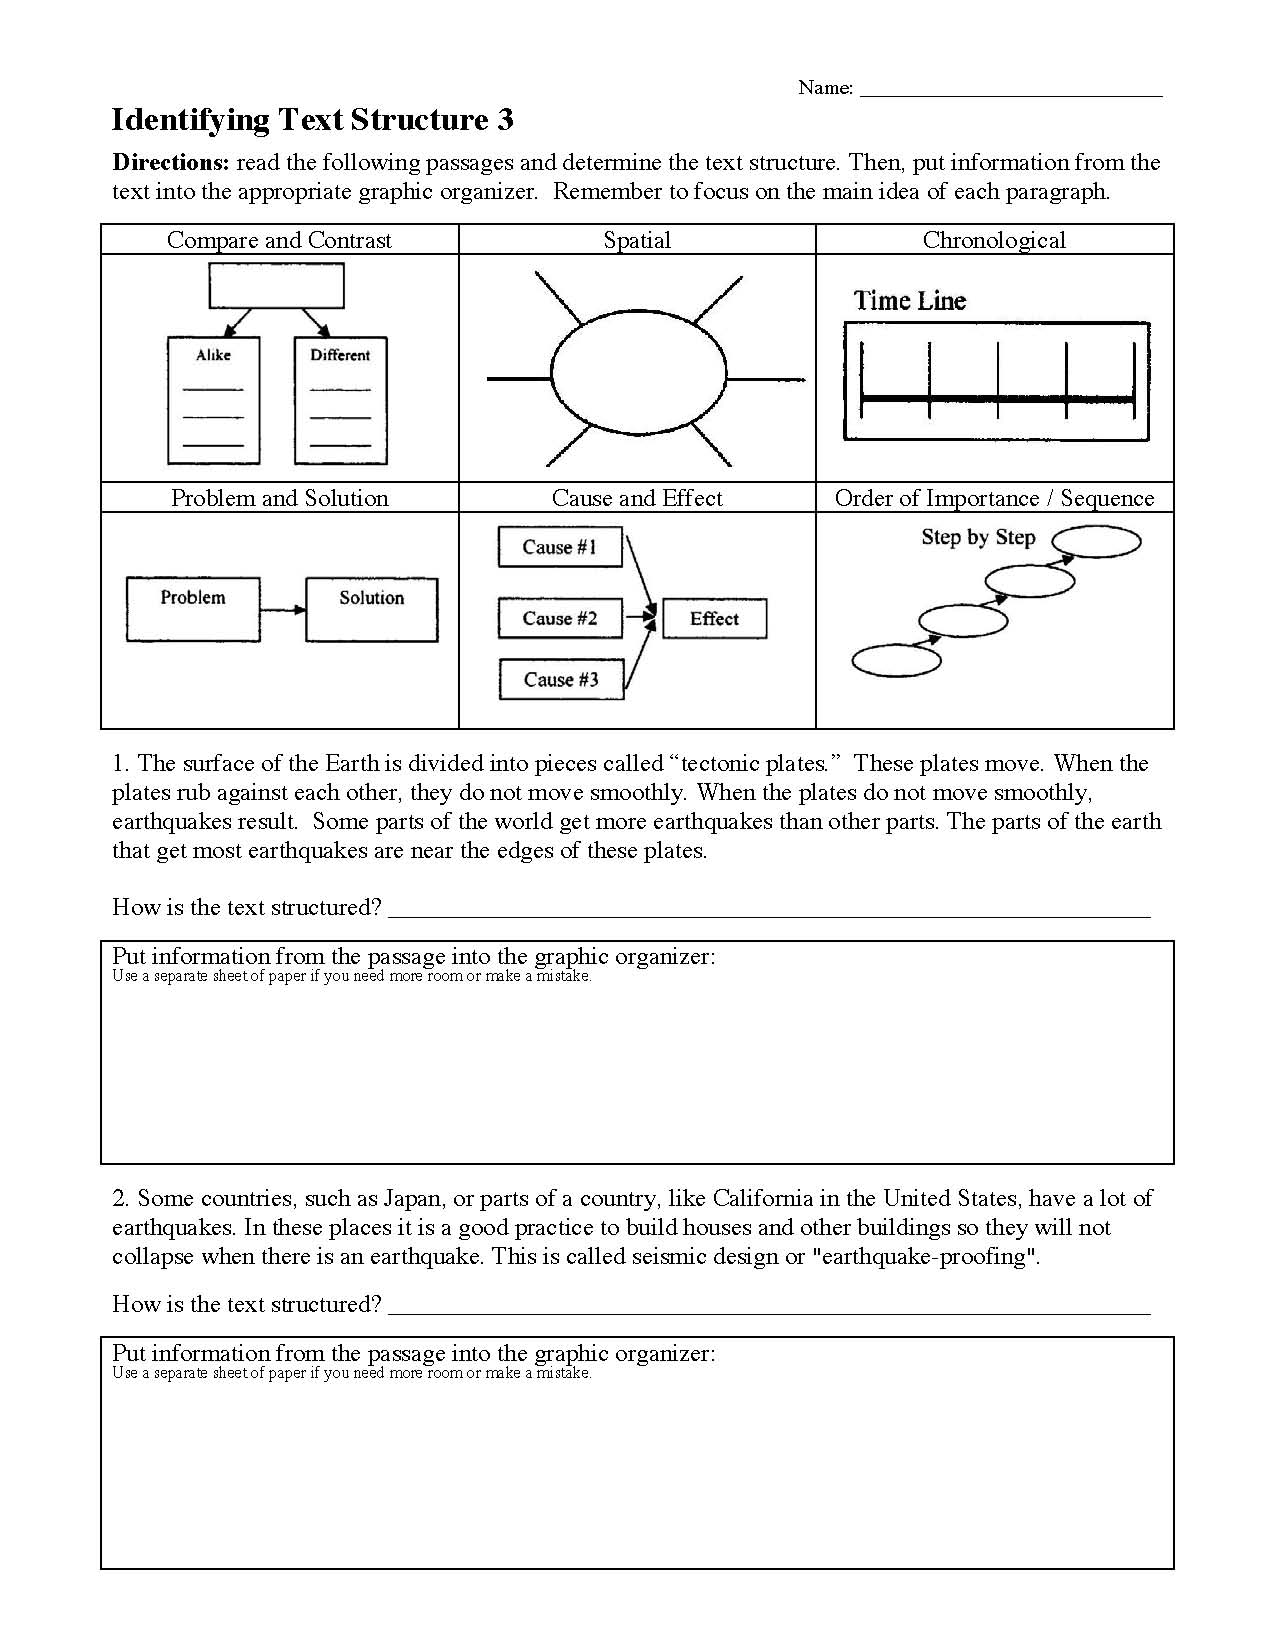 This is a preview image of Text Structure Worksheet 3. Click on it to enlarge it or view the source file.